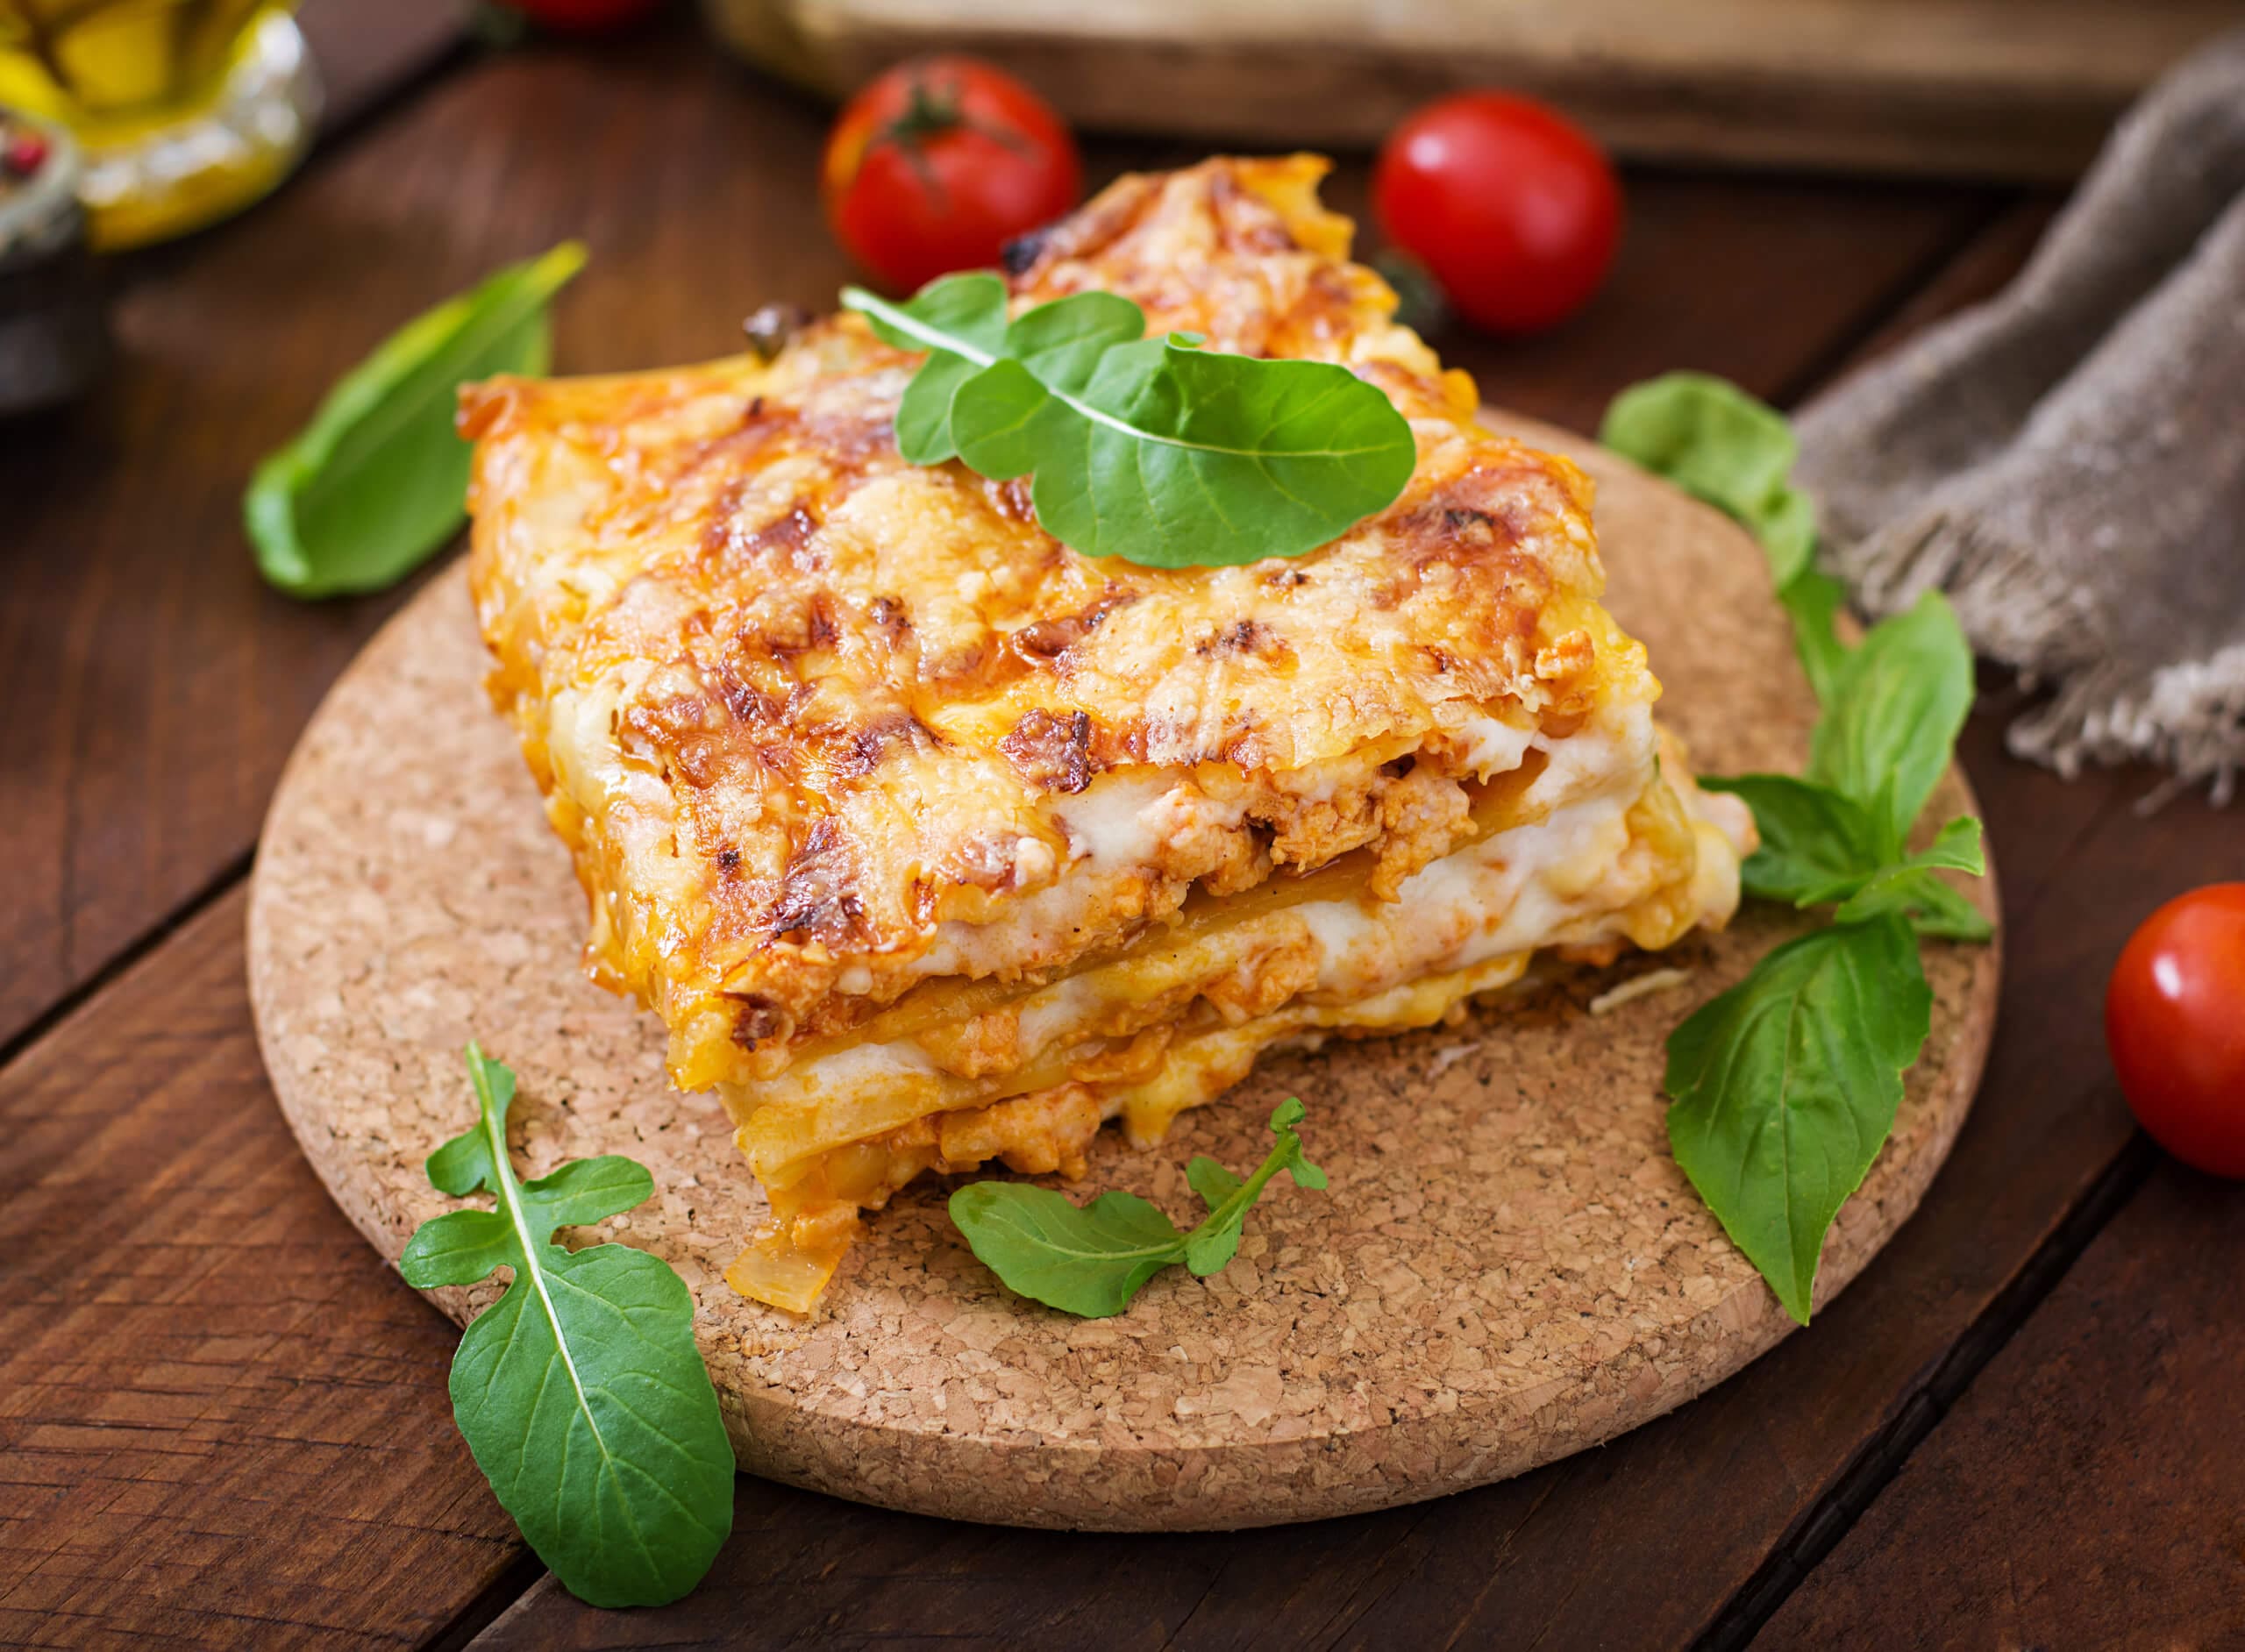 Sweet and Spicy Lasagna - The Butcher Shop, Inc.